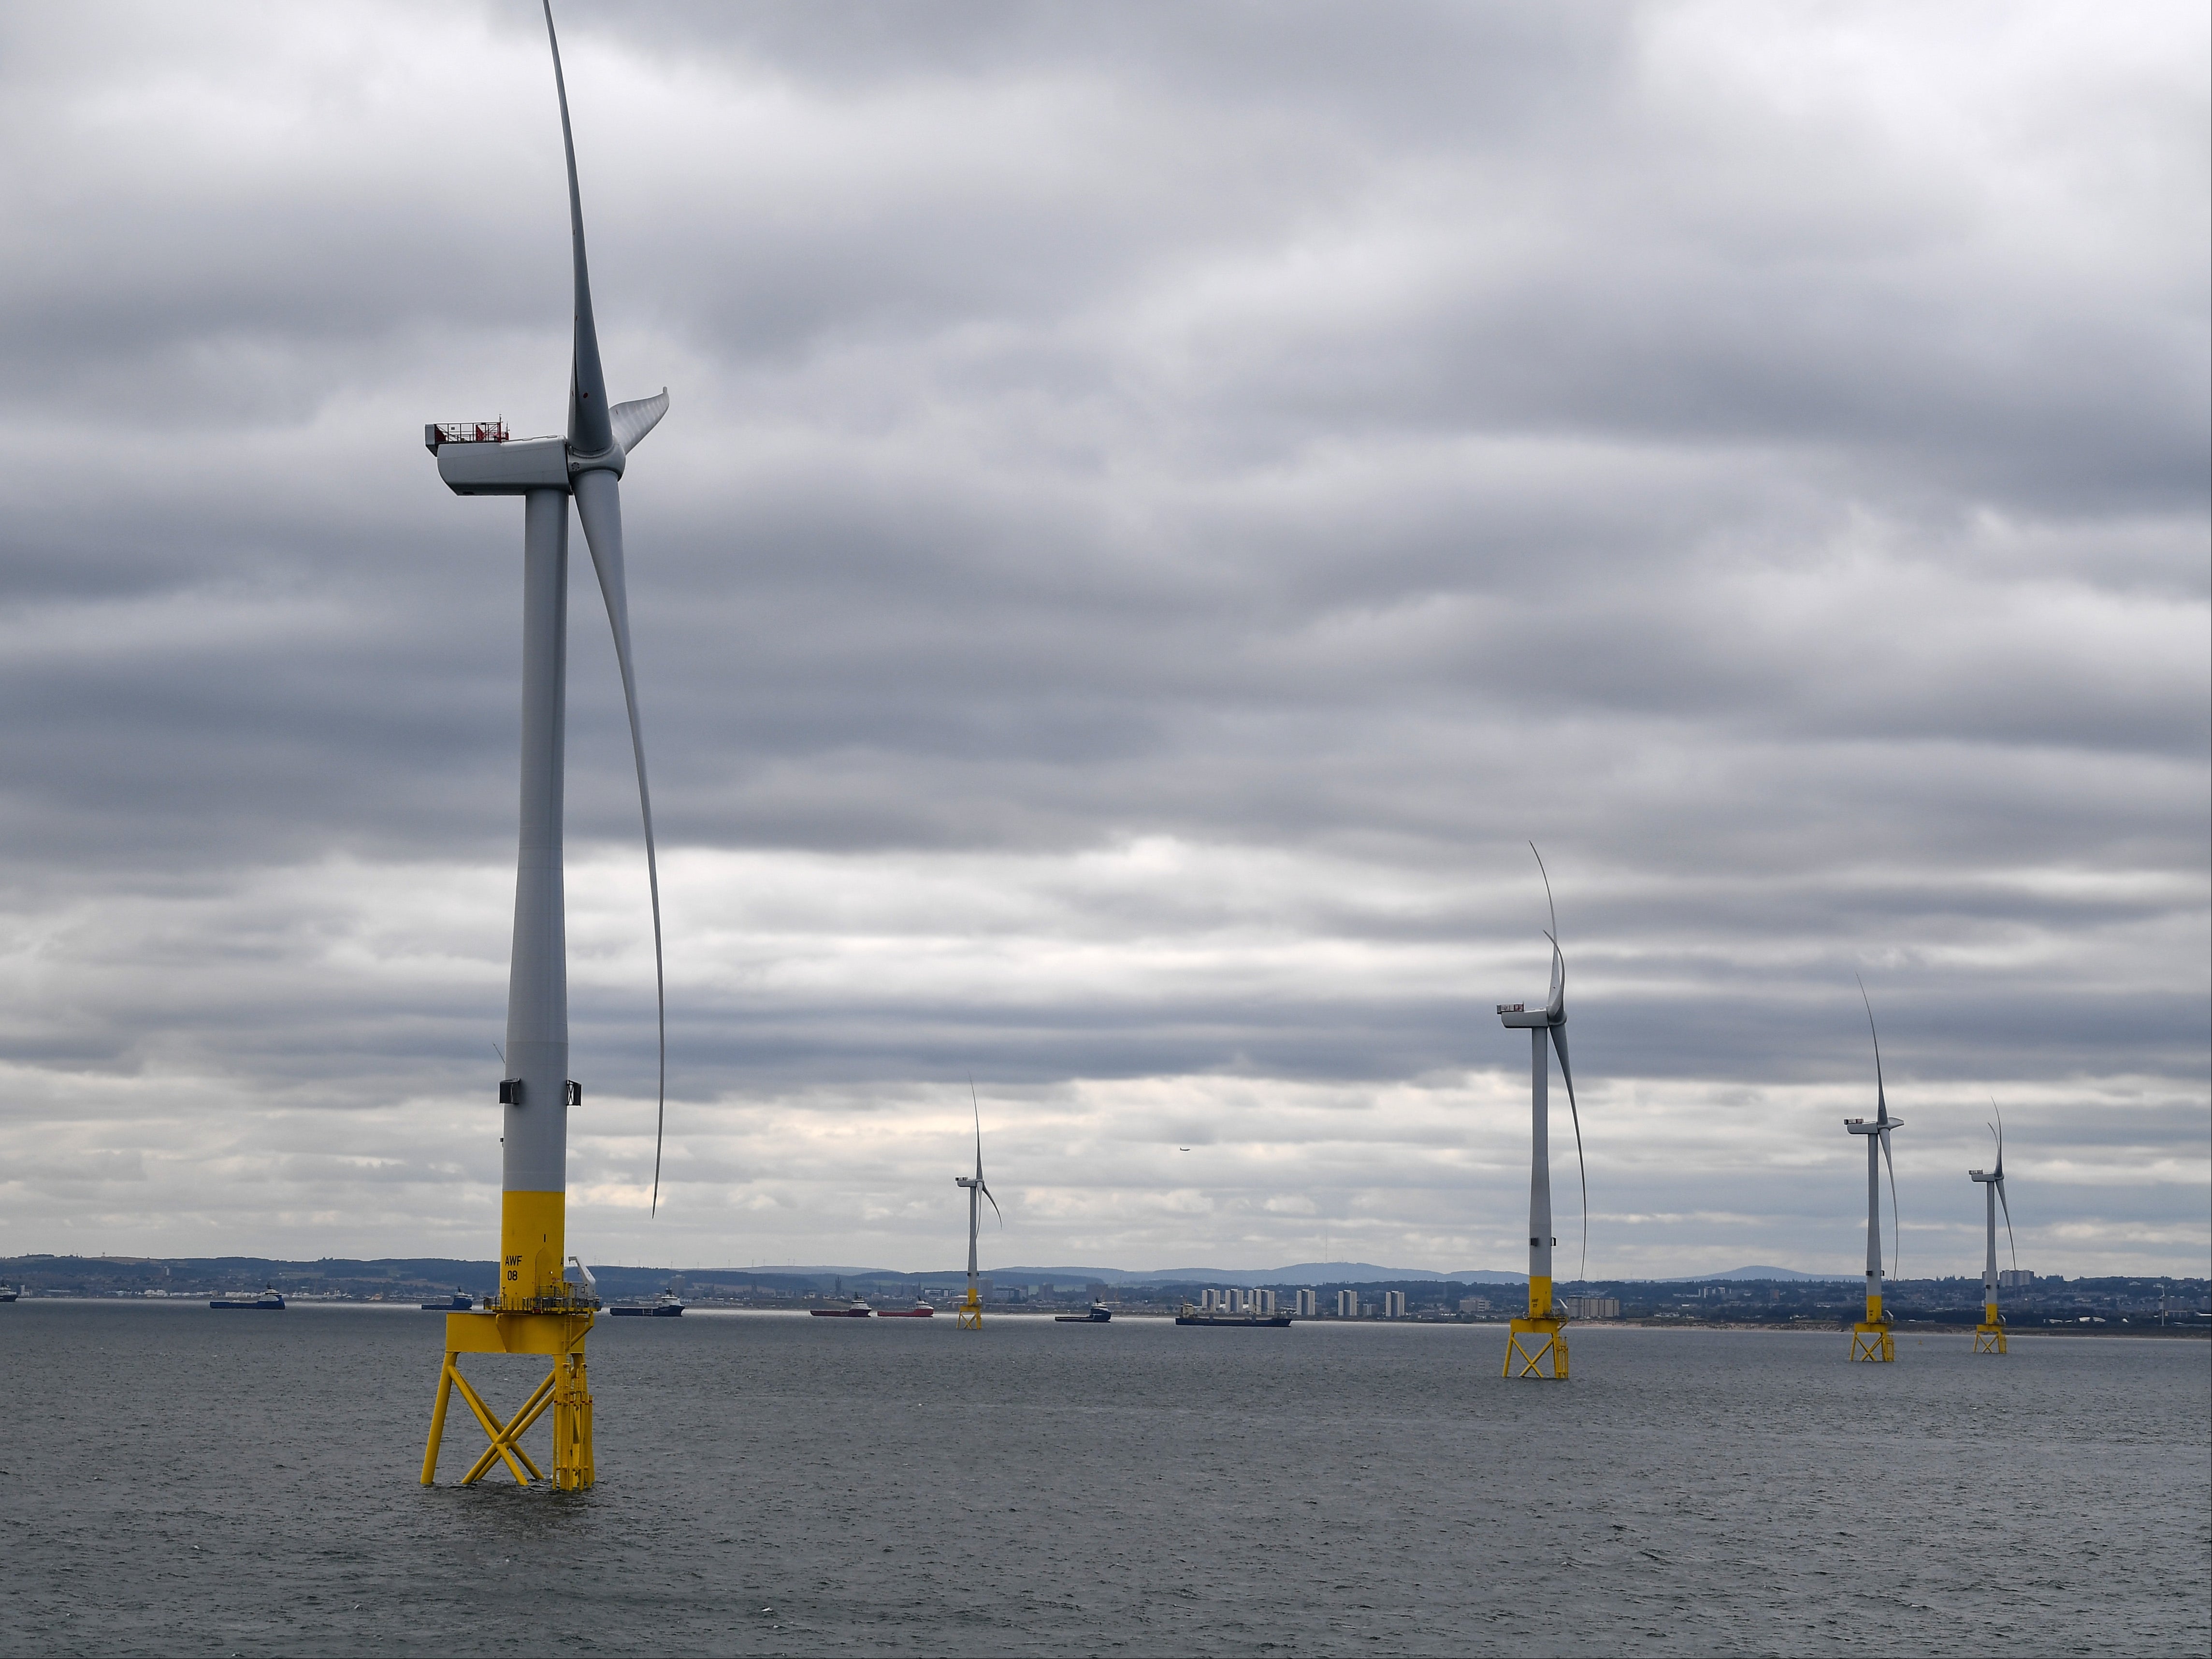 Seventeen applications for wind farms have been given the go ahead for Scottish waters